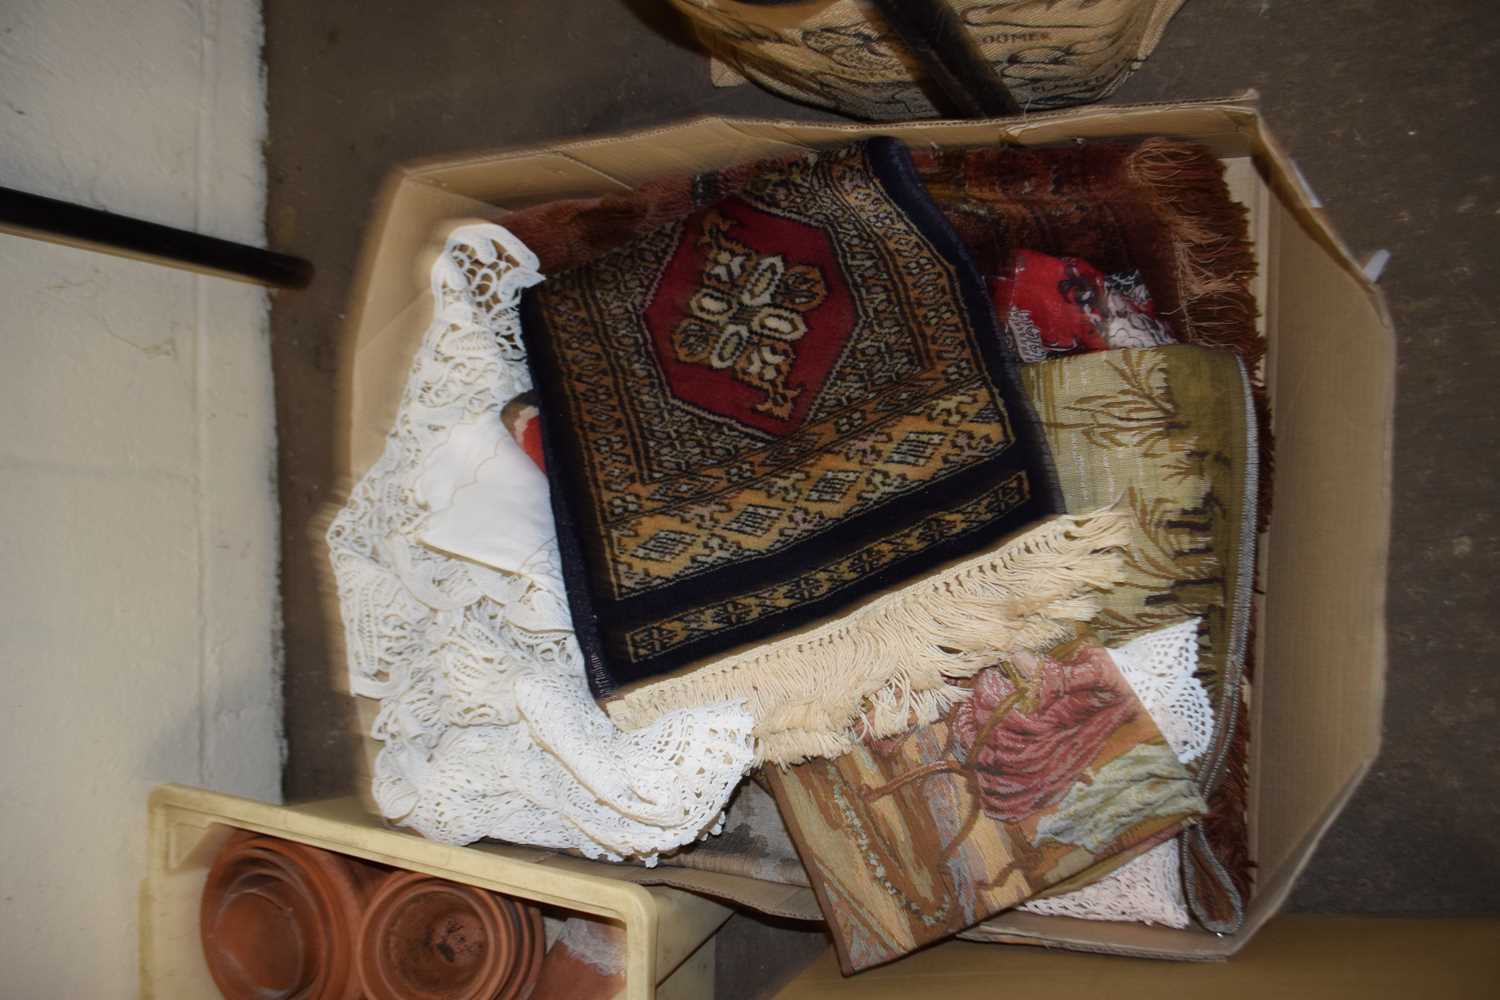 One box of various small rugs, wall hangings etc